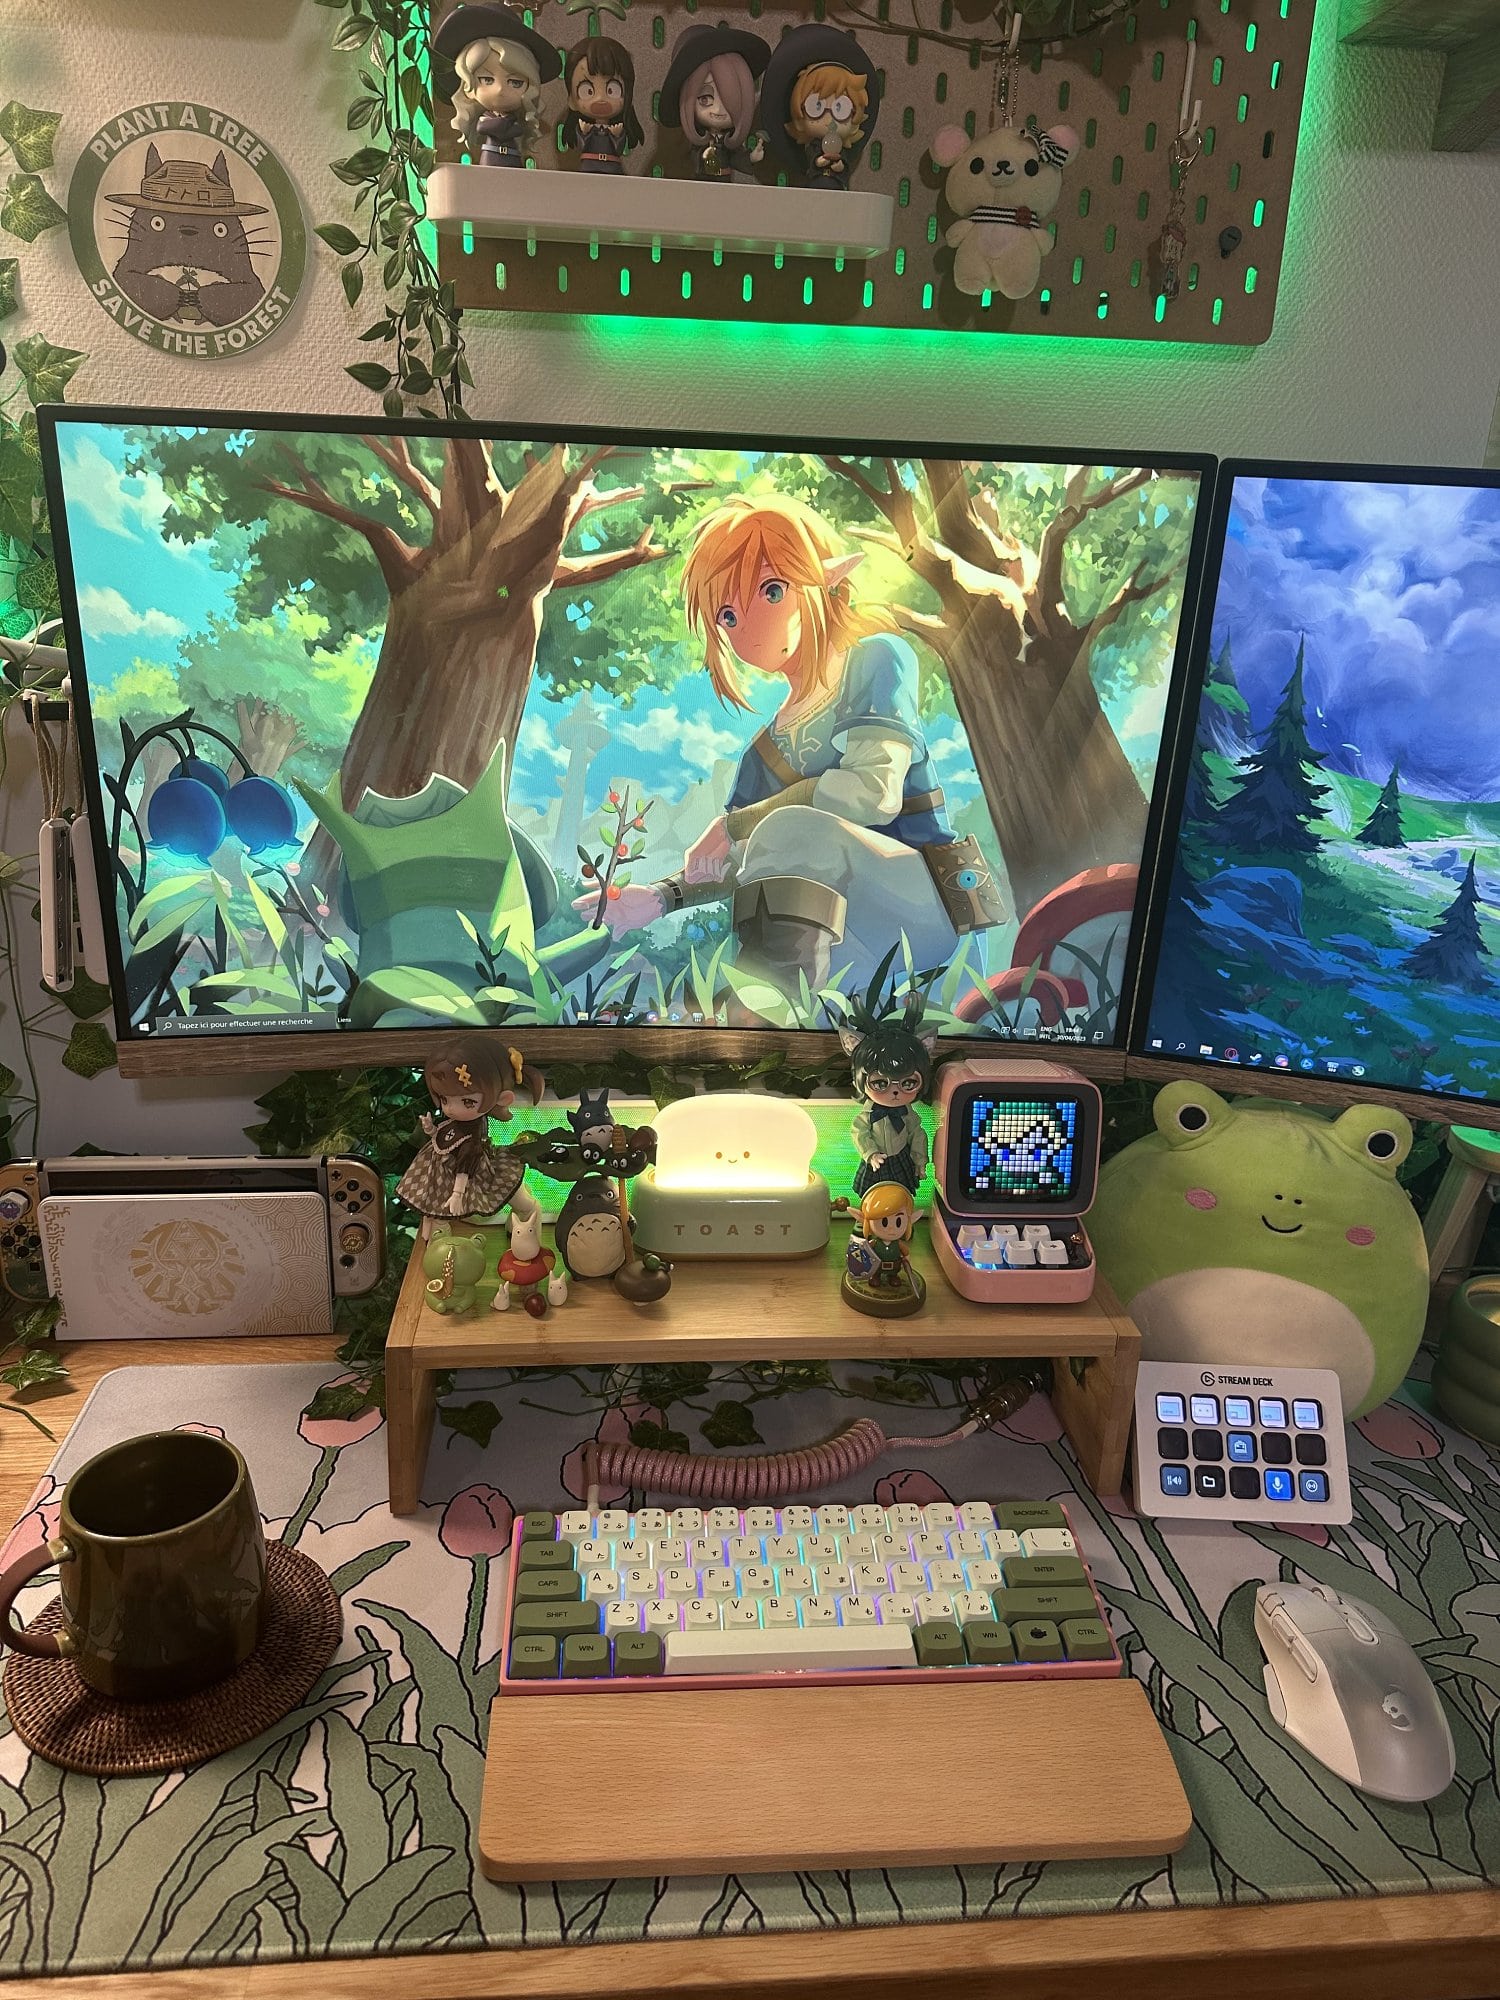 A kawaii gaming setup with two MSI Optix monitors and an Akko 3061S Tokyo keyboard with yellow switches and Sunzit matcha keycaps